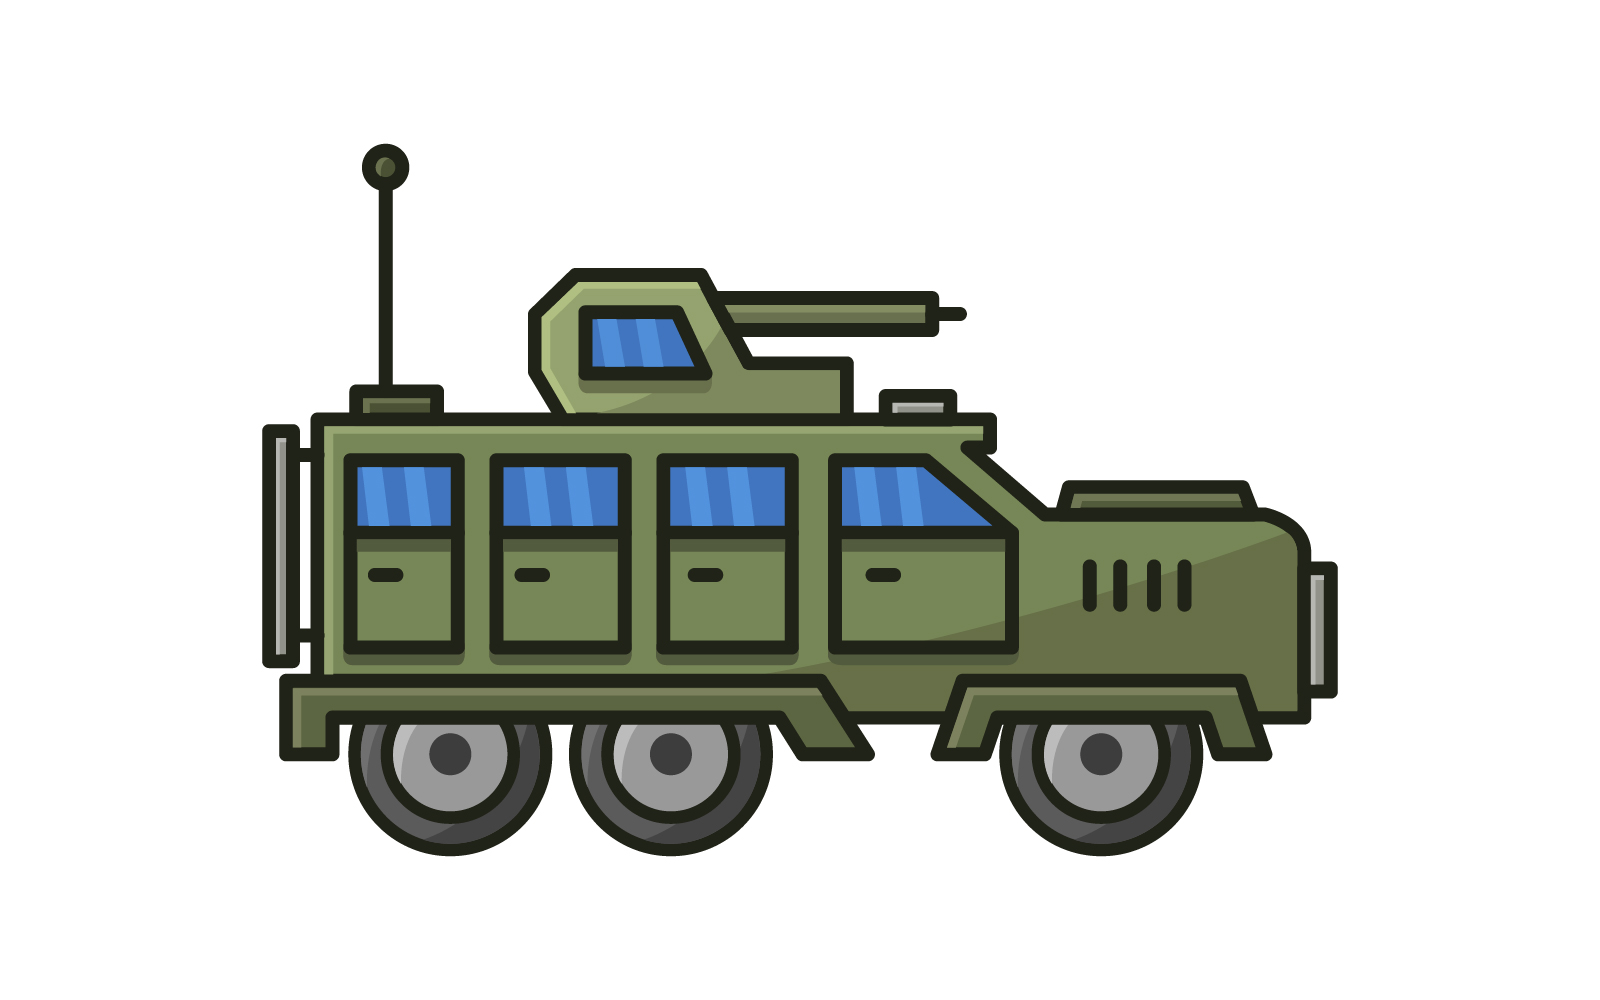 Jeep illustrated in vector